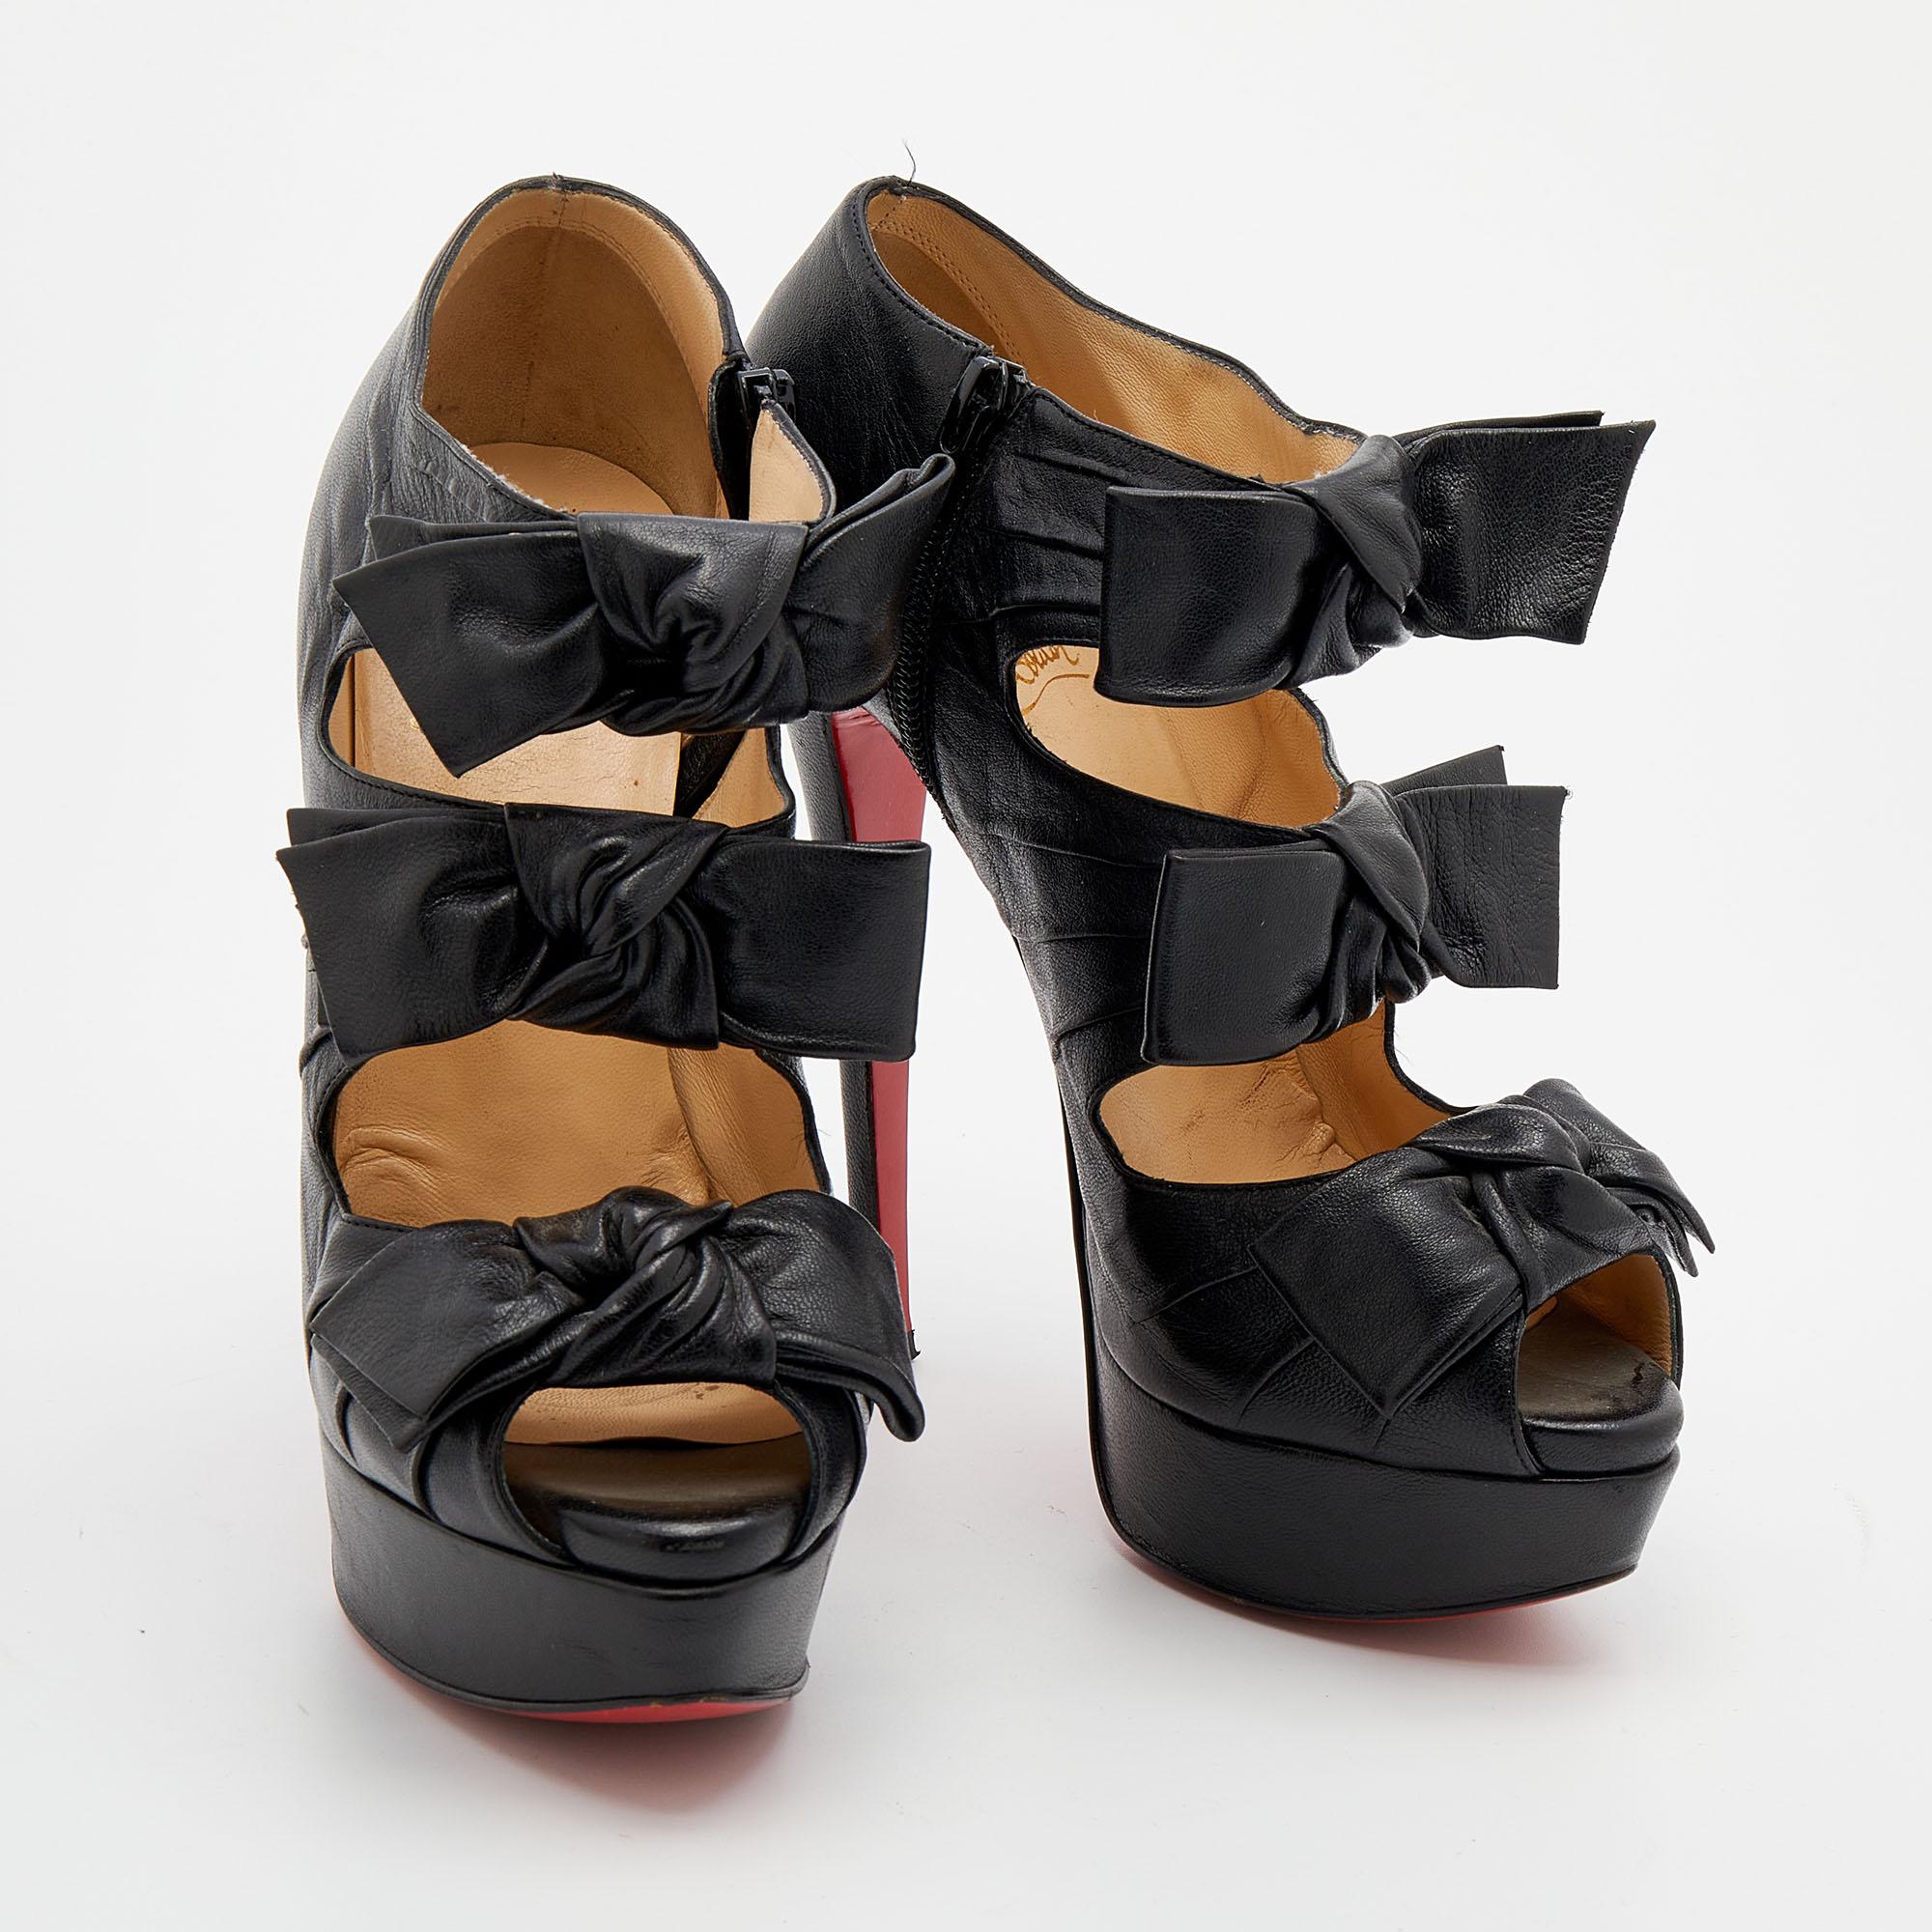 Women's Christian Louboutin Black Leather Madame Butterfly Platform Booties Size 37 For Sale